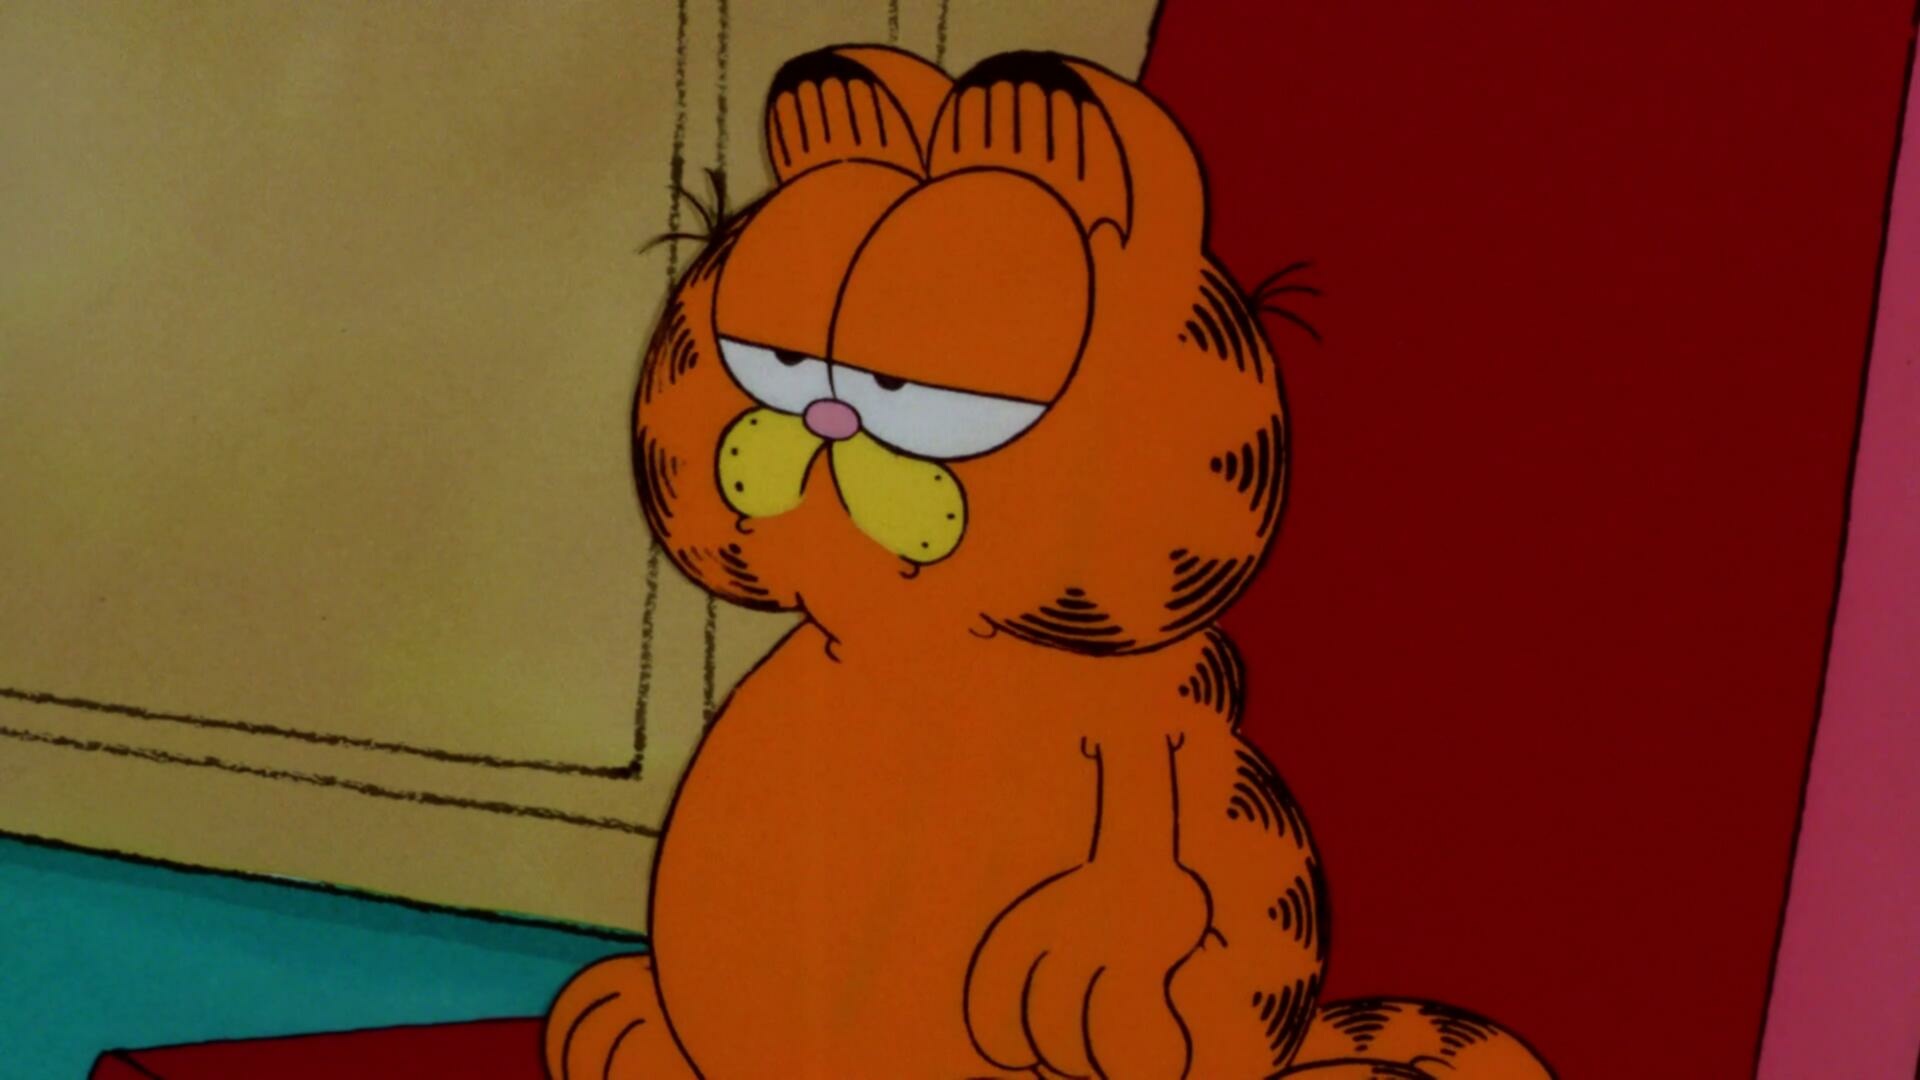 Garfield And Friends S02E13 The Curse of Klopman Mud Sweet Mud Rainy Day Dreams 1080p WEB DL AAC2 0